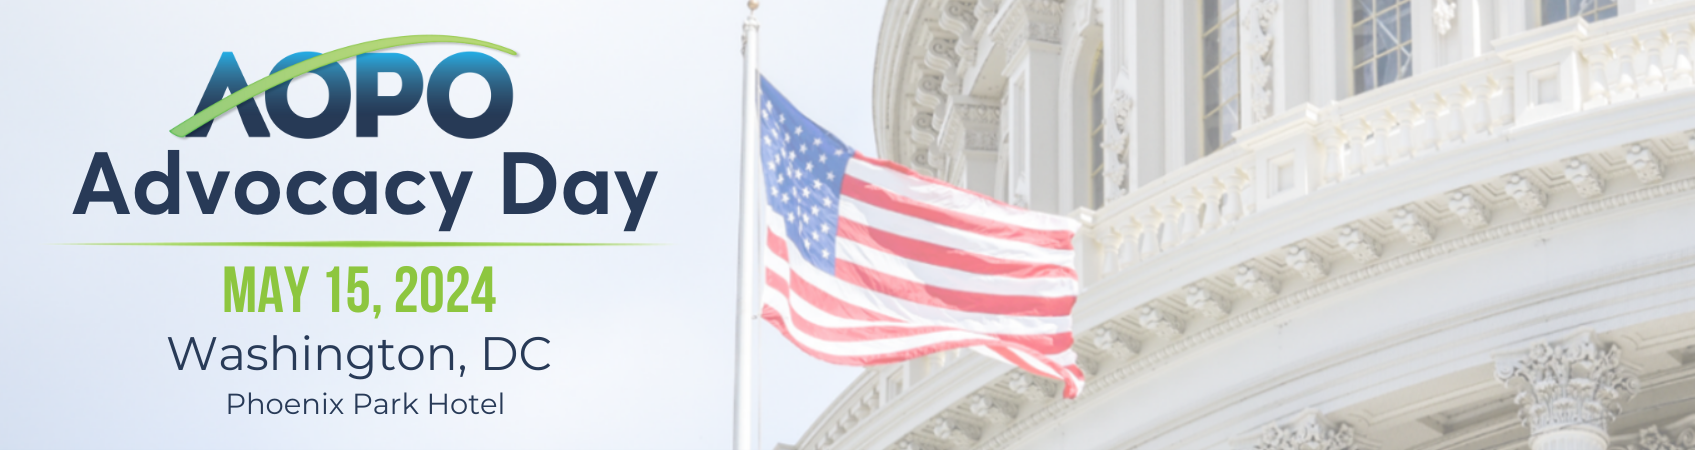 2024 Advocacy Day Banner 1